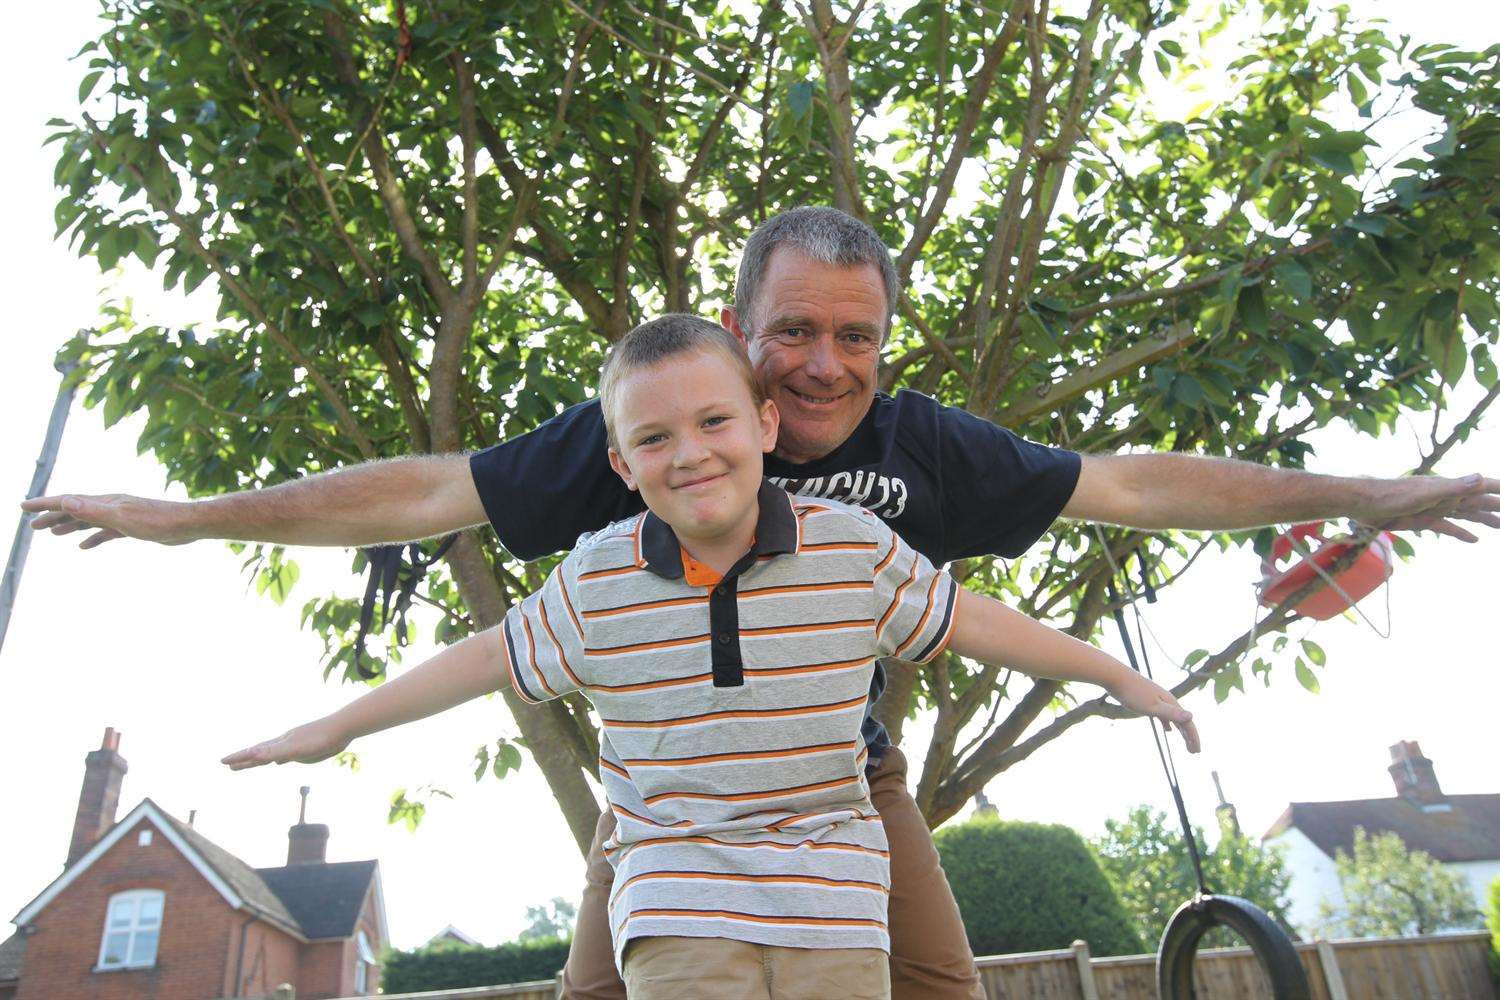 Ryan Cook, 10 with his dad, Richard